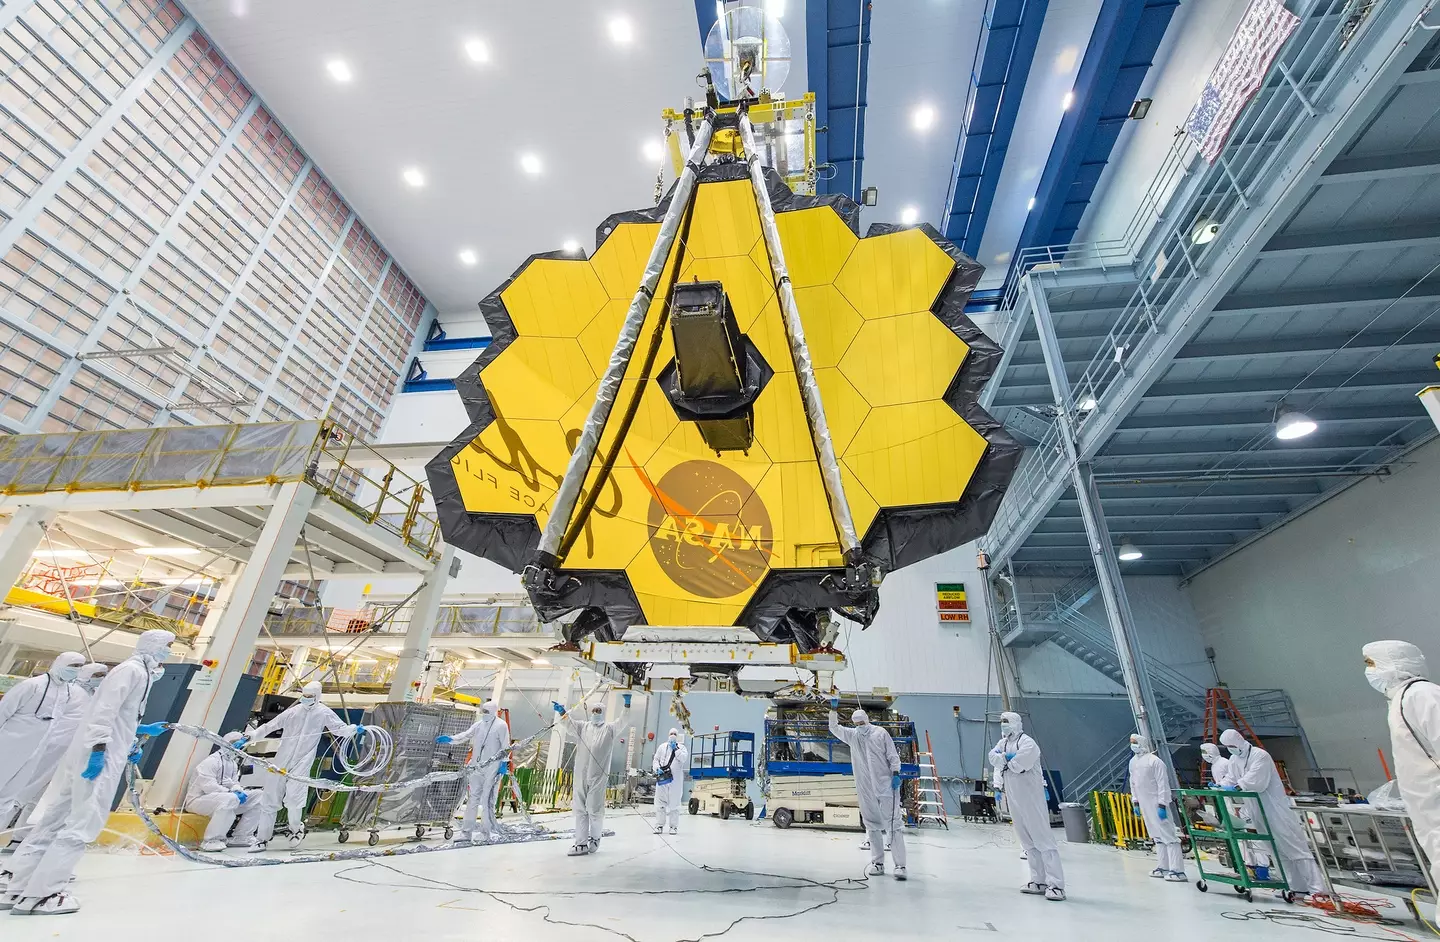 The James Webb Space Telescope being constructed before launching in to the cosmos (NASA/Desiree Stover)